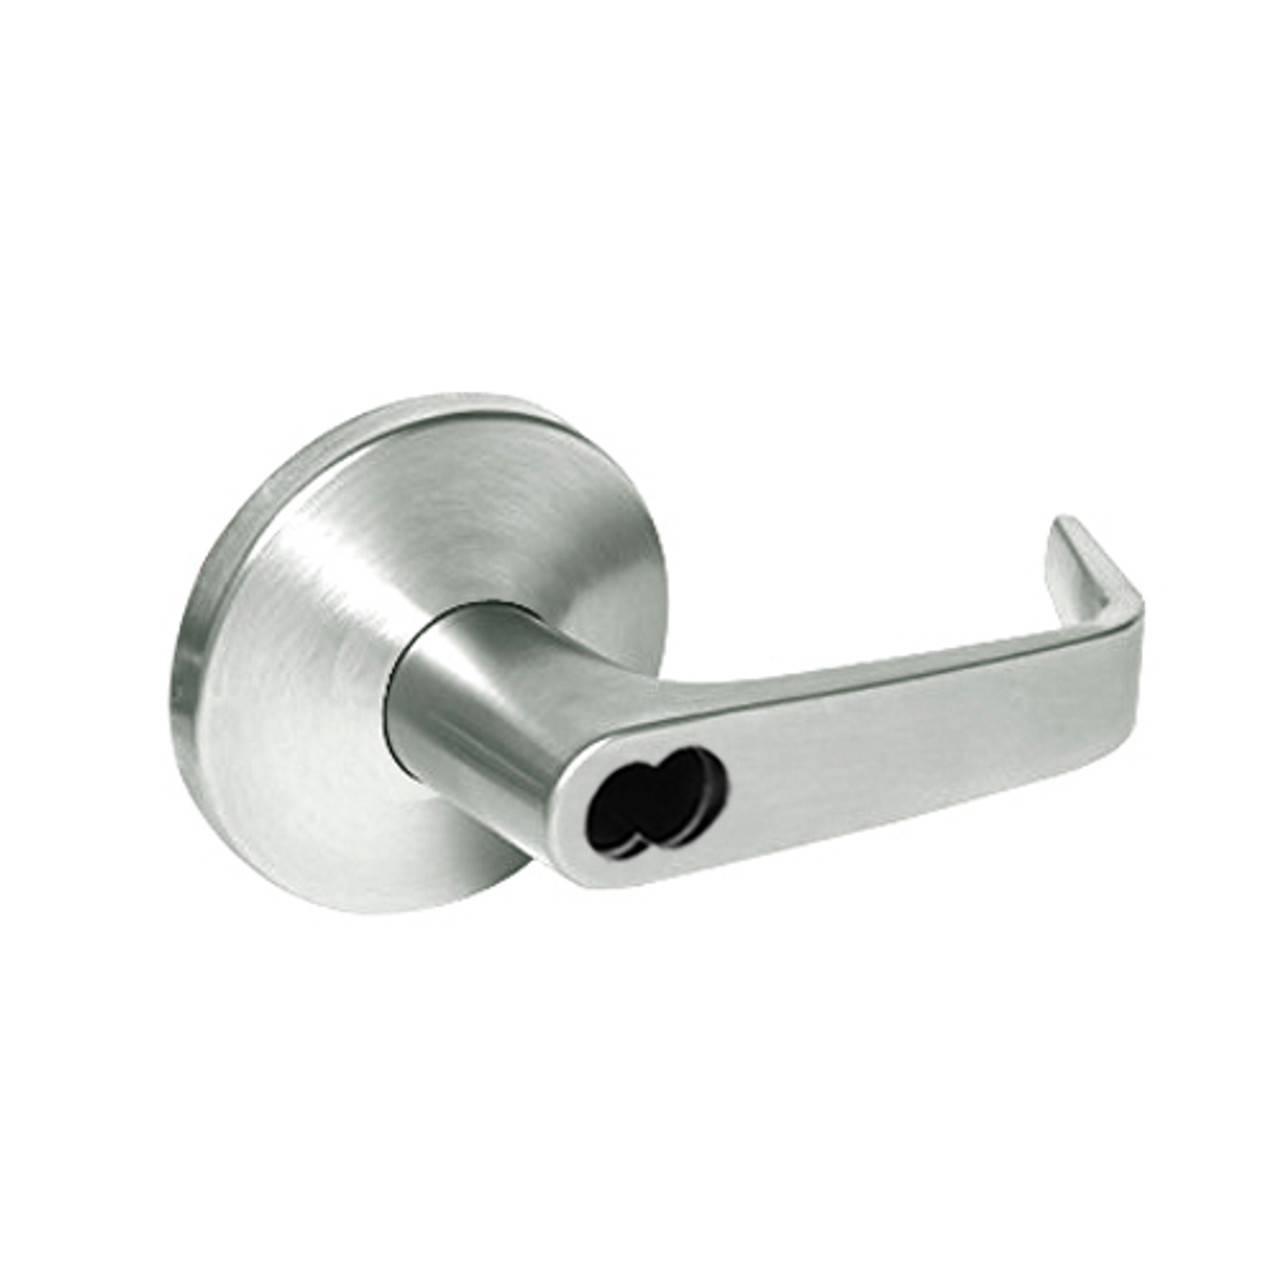 9K37HJ15LSTK619 Best 9K Series Hotel Cylindrical Lever Locks with Contour Angle with Return Lever Design Accept 7 Pin Best Core in Satin Nickel